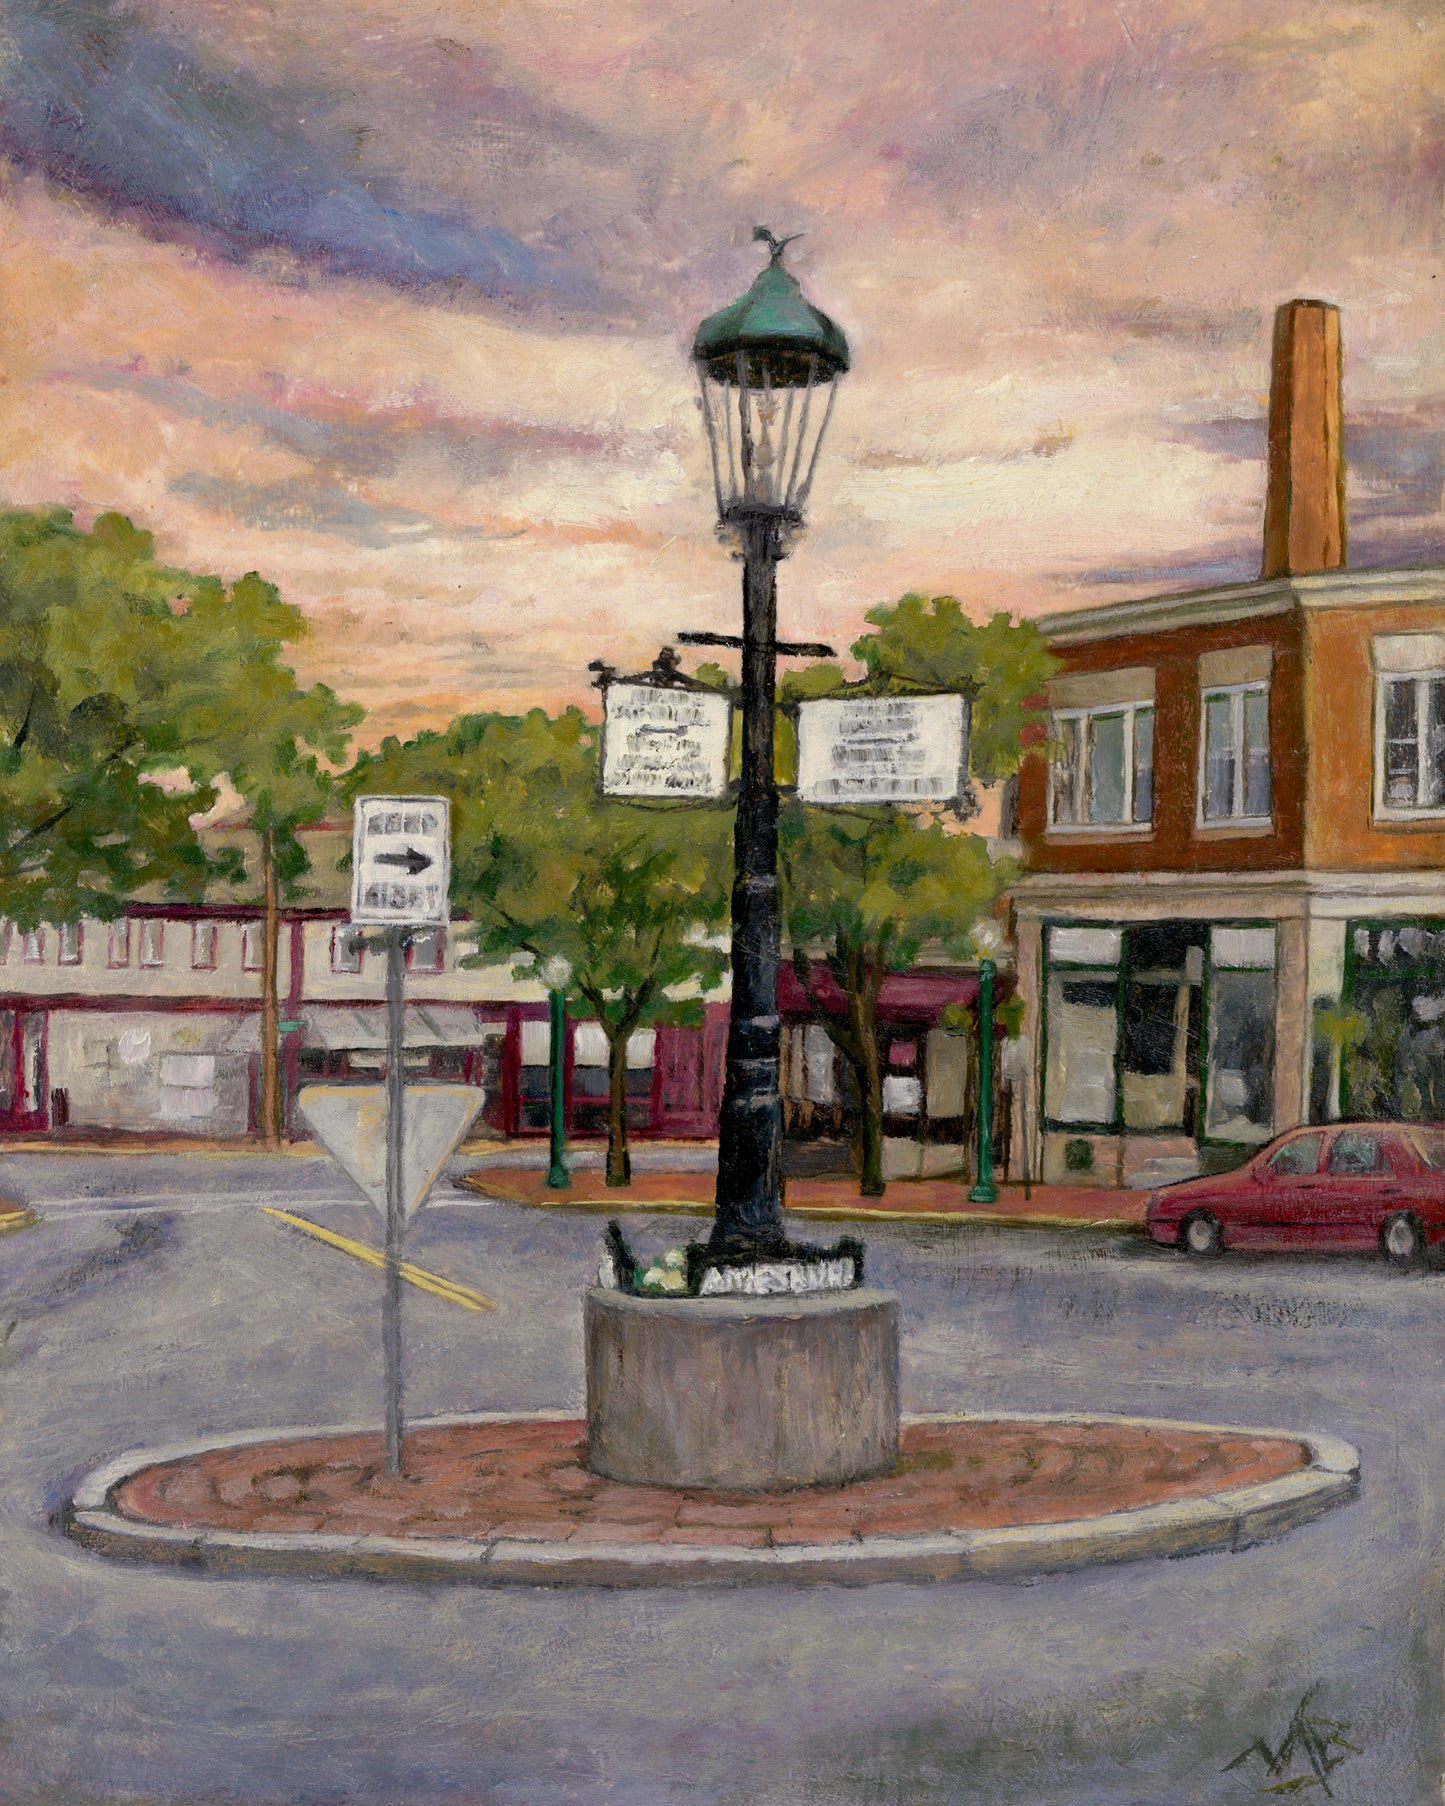 AMESBURY MA // Oil Painting